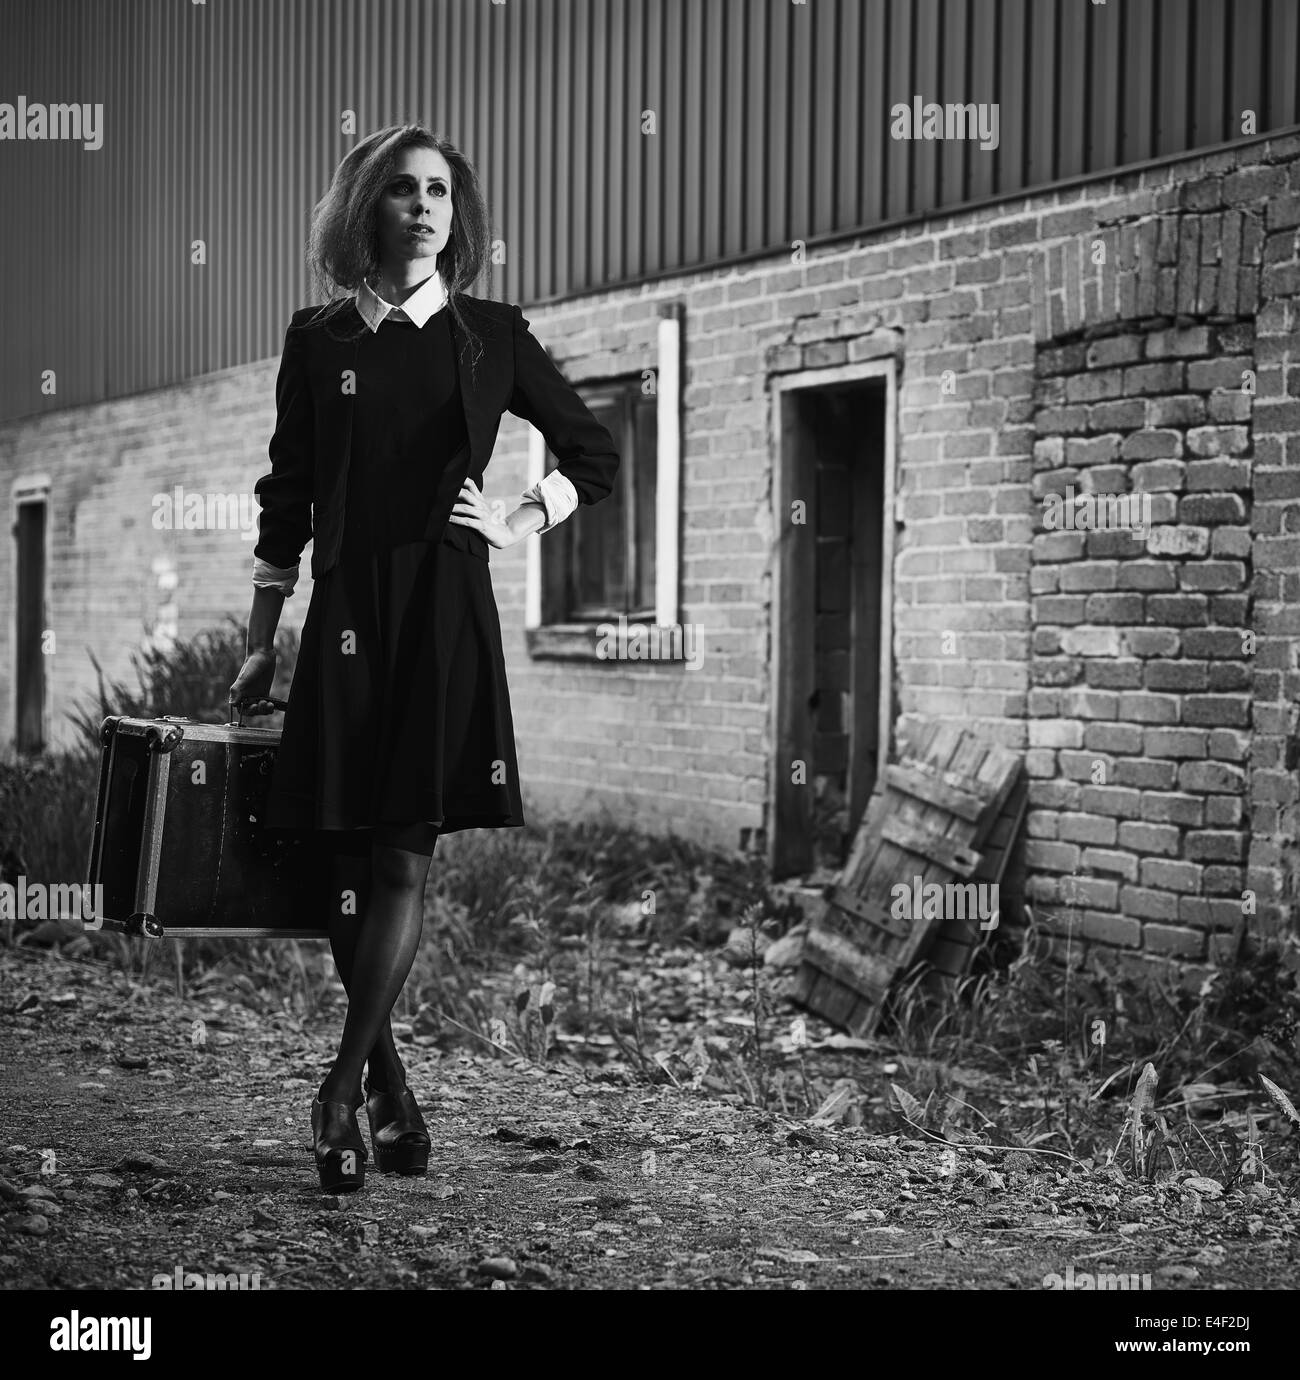 Fashionable young woman with her suitcase, old rural scene, black and white image Stock Photo